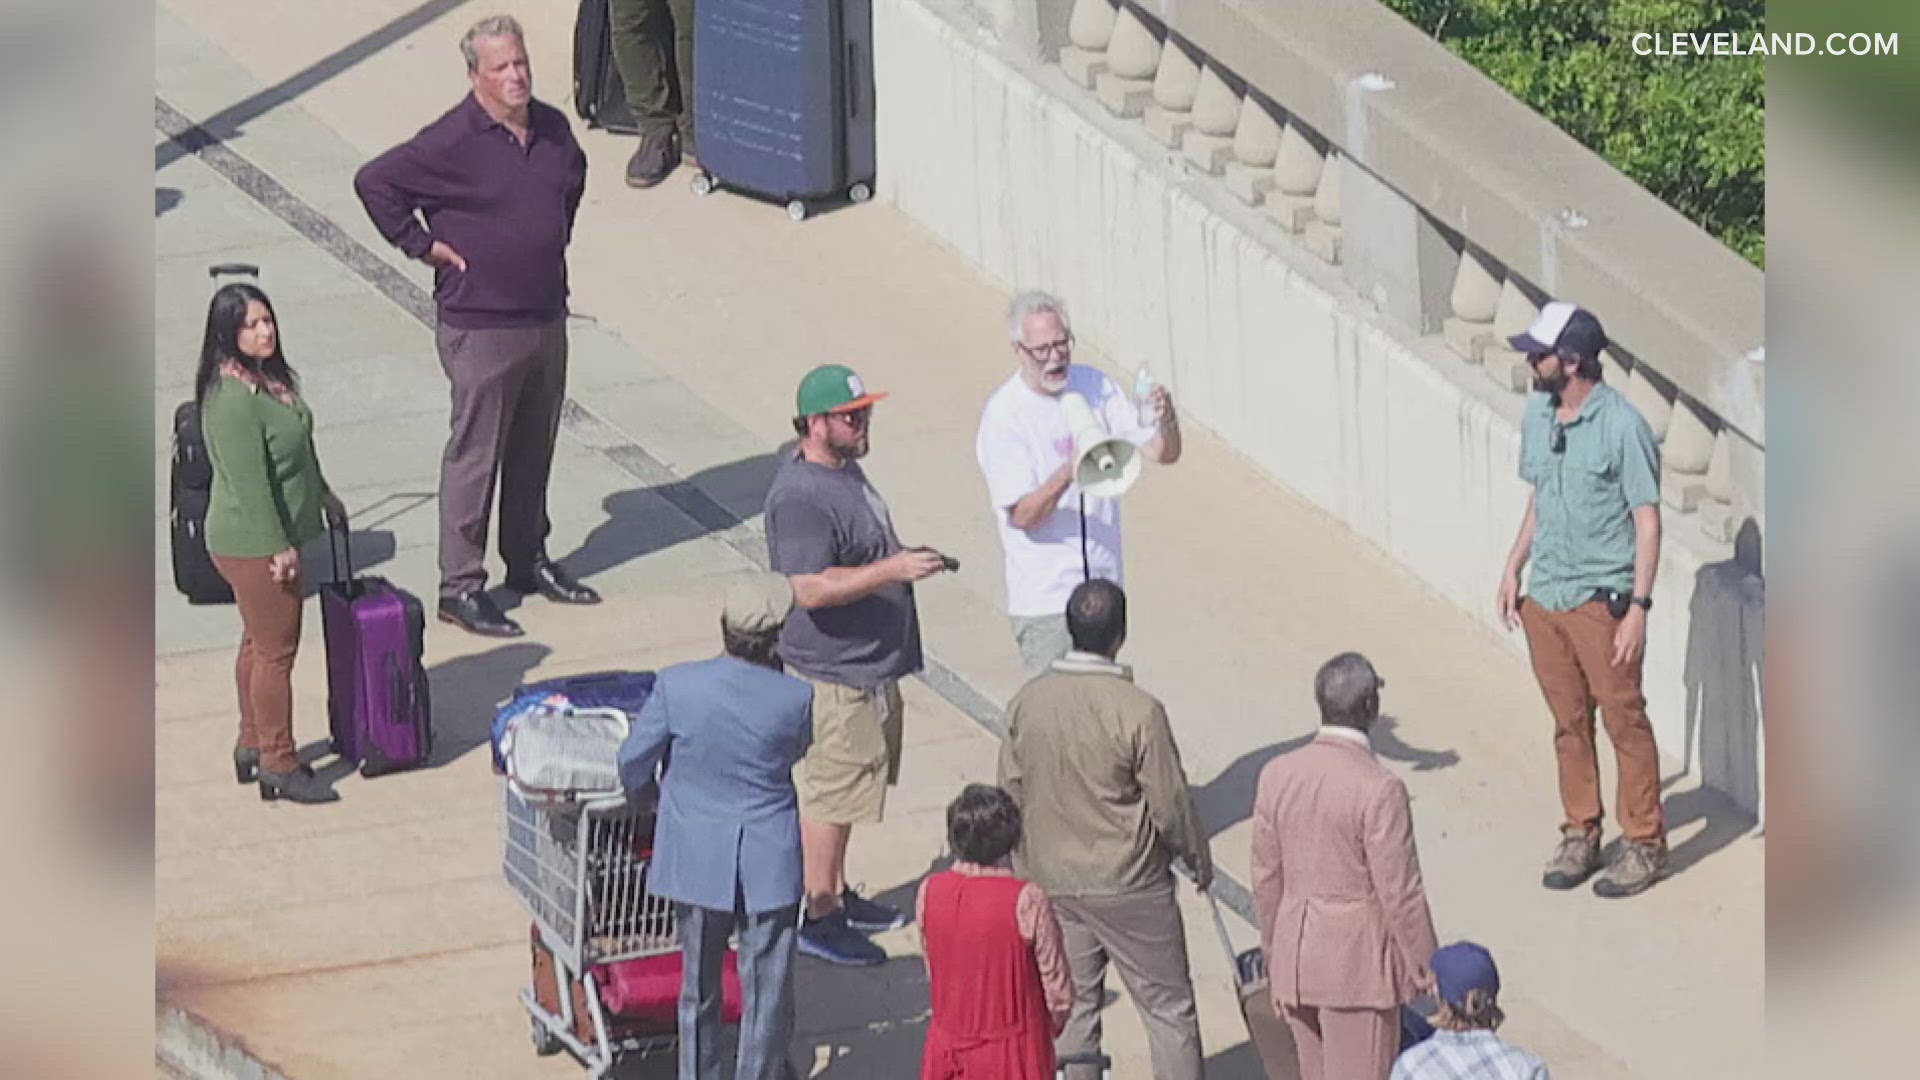 Our news partners at Cleveland.com have captured more action as the "Superman" movie continues filming in the city.